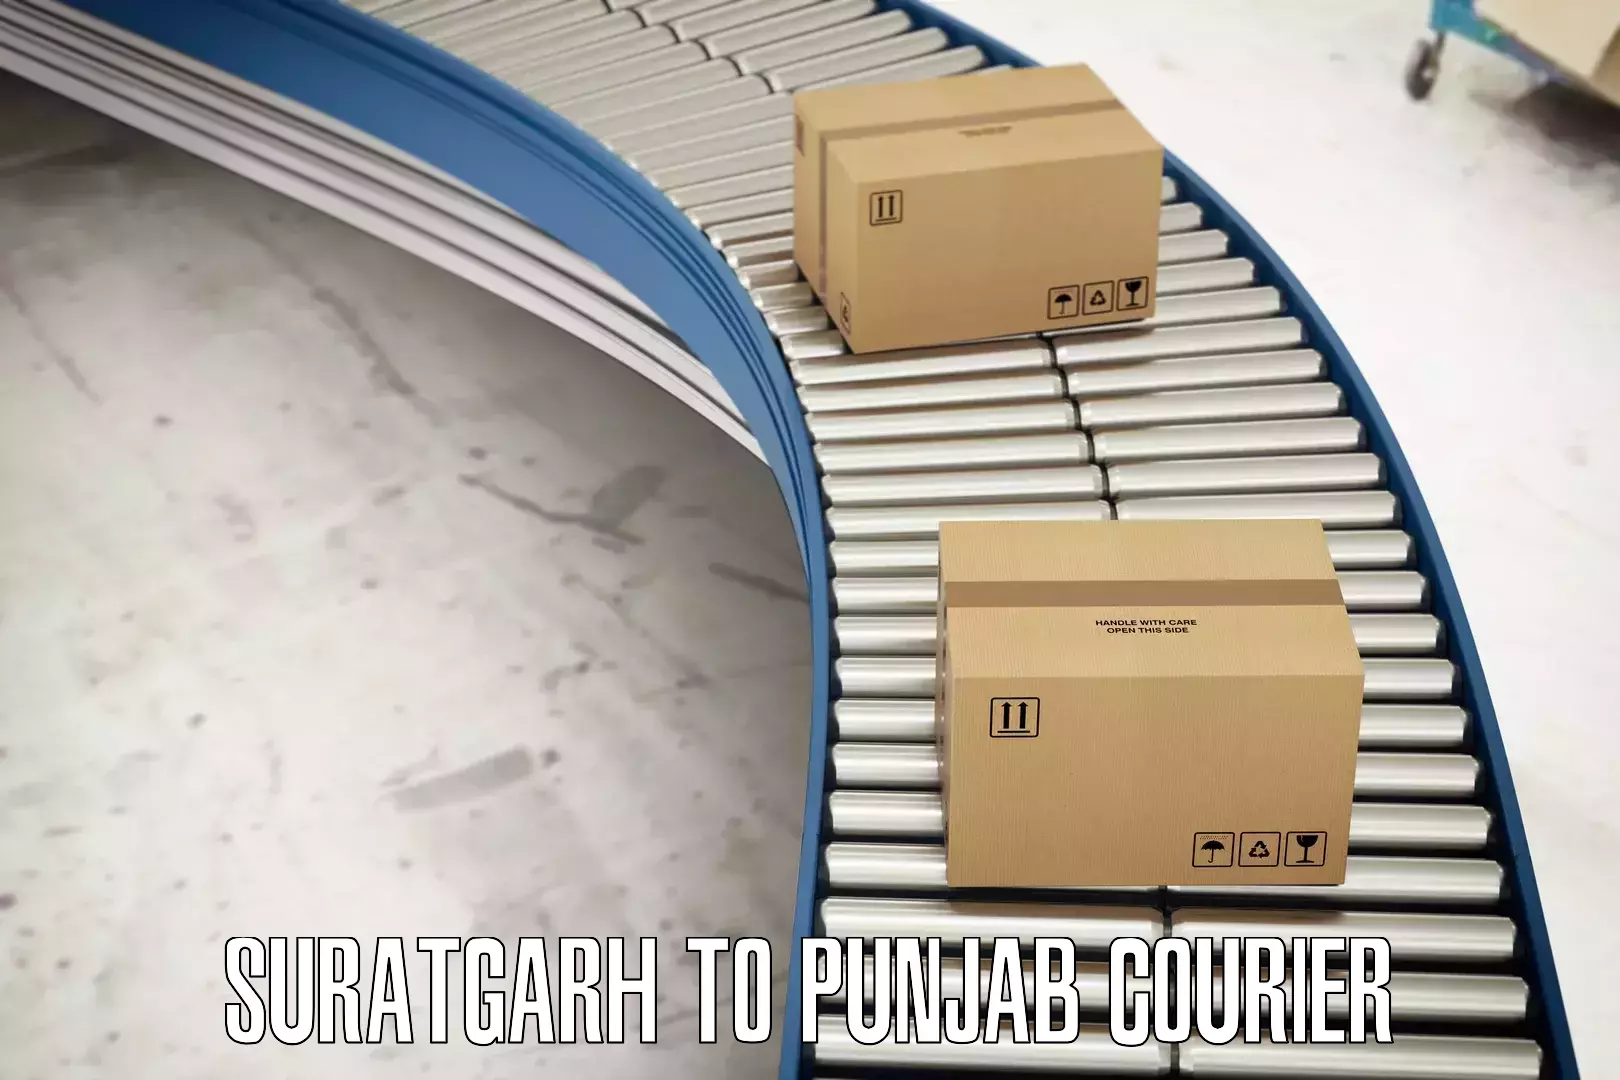 Parcel handling and care Suratgarh to Beas